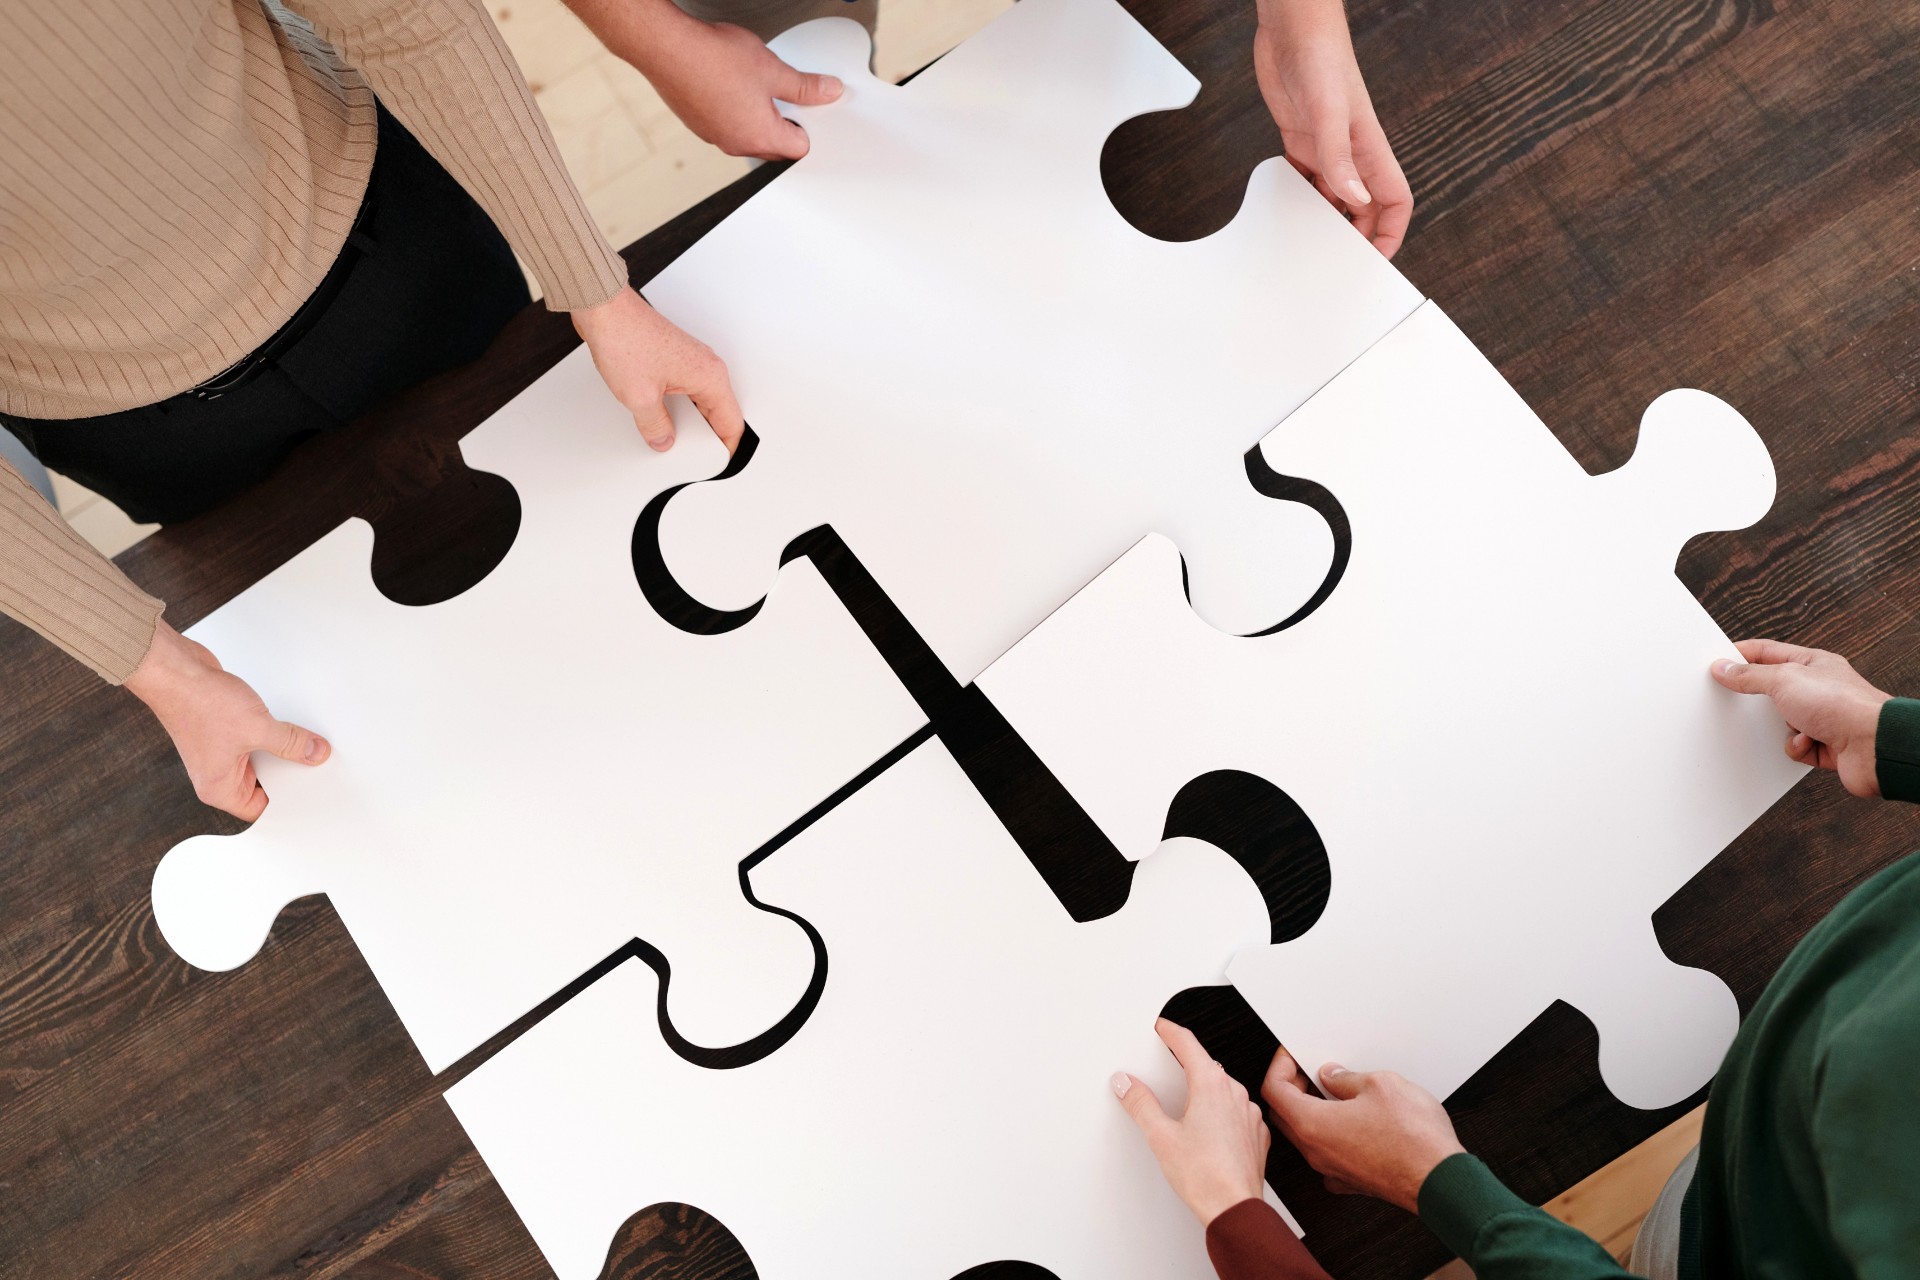 Trying to solve the growth marketing puzzle? You're not alone! Many companies are unintentionally neglecting growth marketing as a key piece.